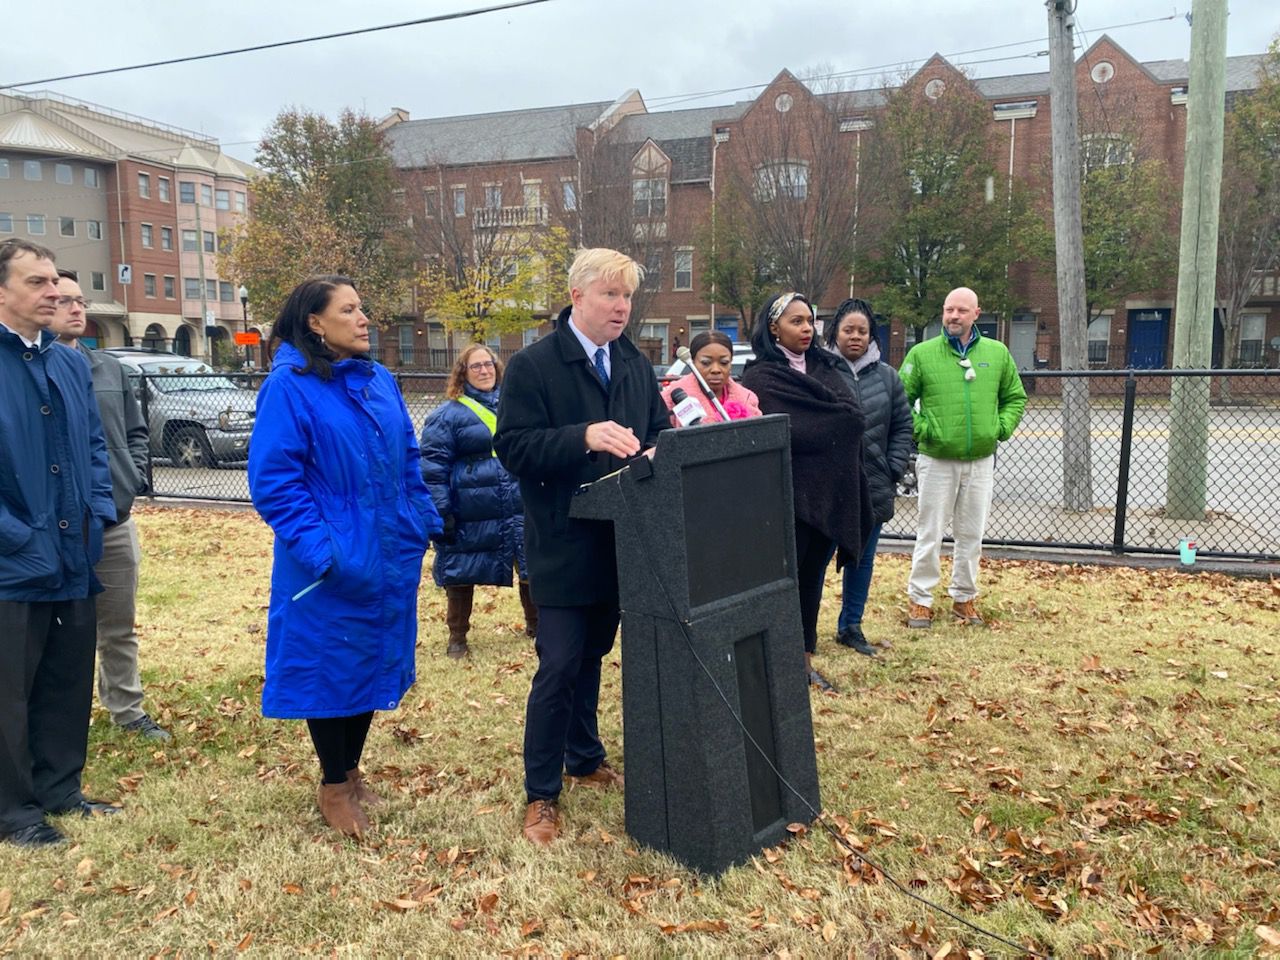 City Council member Mark Jeffreys joined other city leaders and 'complete streets' advocates on Linn Street to outline the city's use for the transportation design tool in Cincinnati road projects in the future. (Casey Weldon/Spectrum News 1)